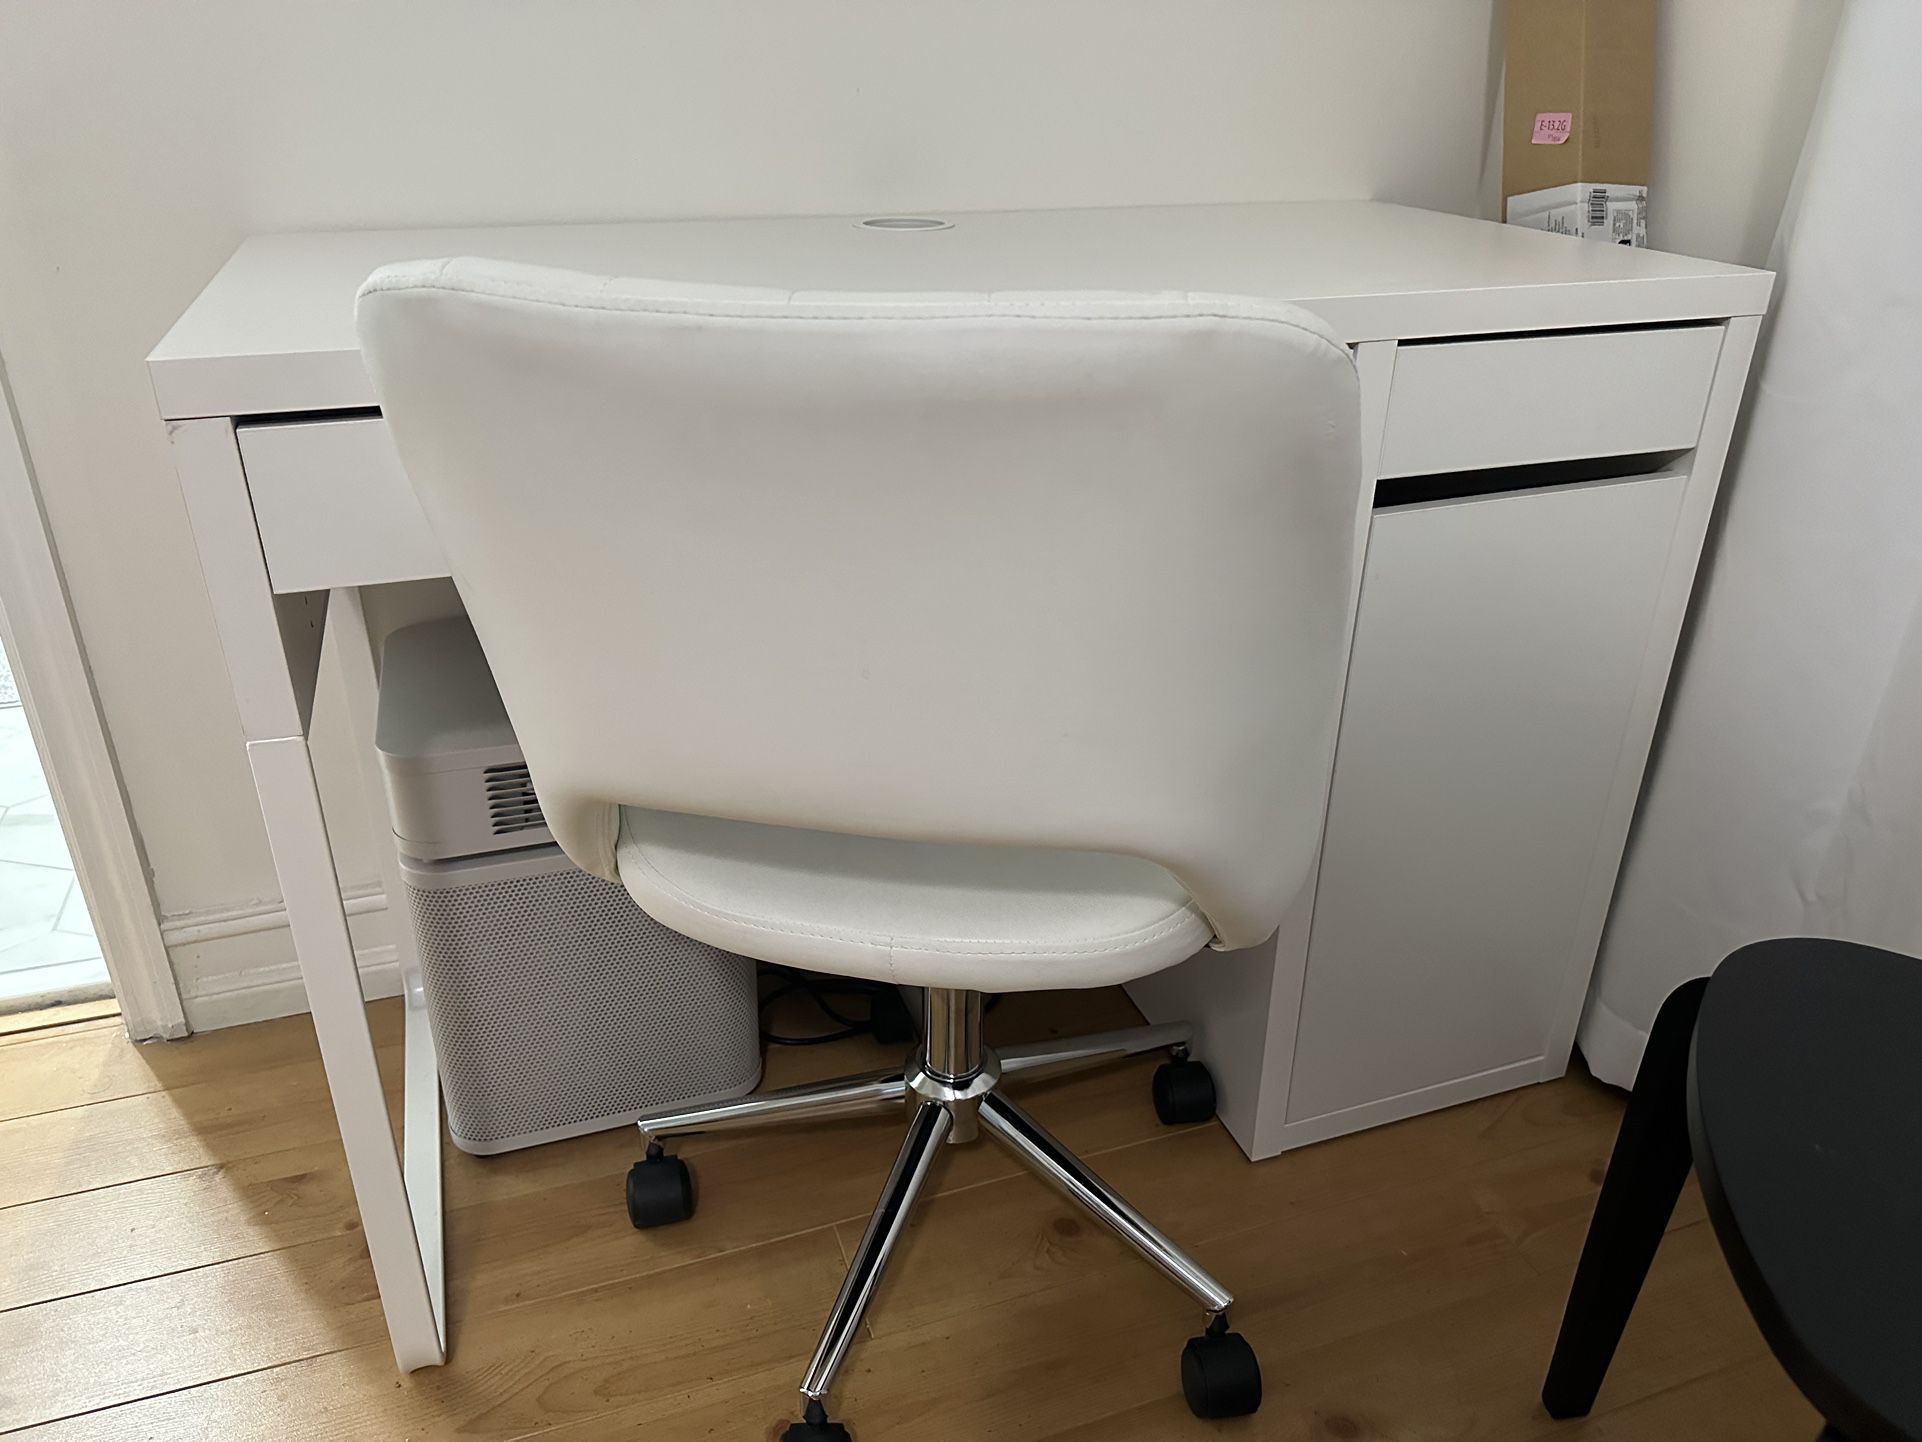 IKEA Micke White Desk Vanity With Mirror And Chair